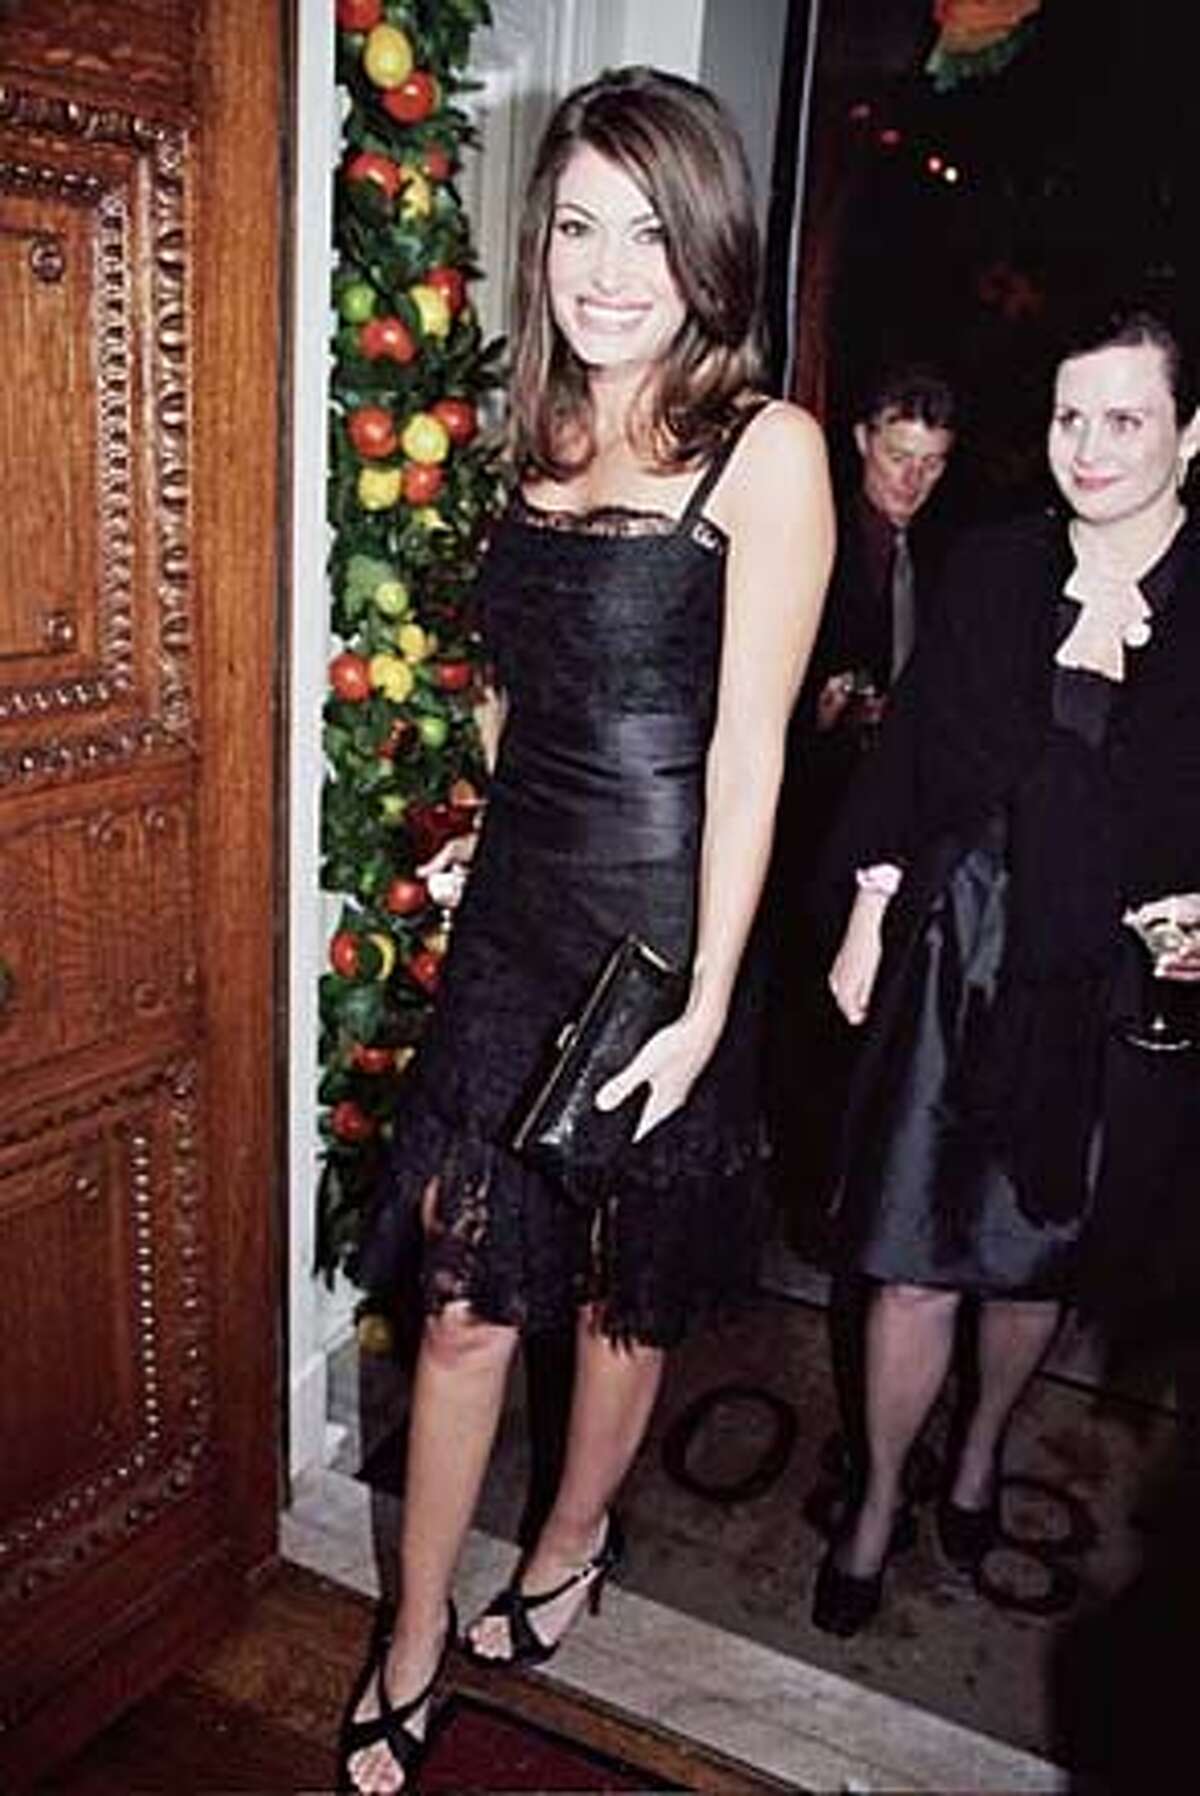 Ann Getty celebrated the 72nd birthday of her husband, philanthropist & composer Gordon Getty, at a black-tie dinner-dance at their home. (From left): KIMBERLY GUILFOYLE NEWSOM Ran on: 12-25-2005 Photo caption